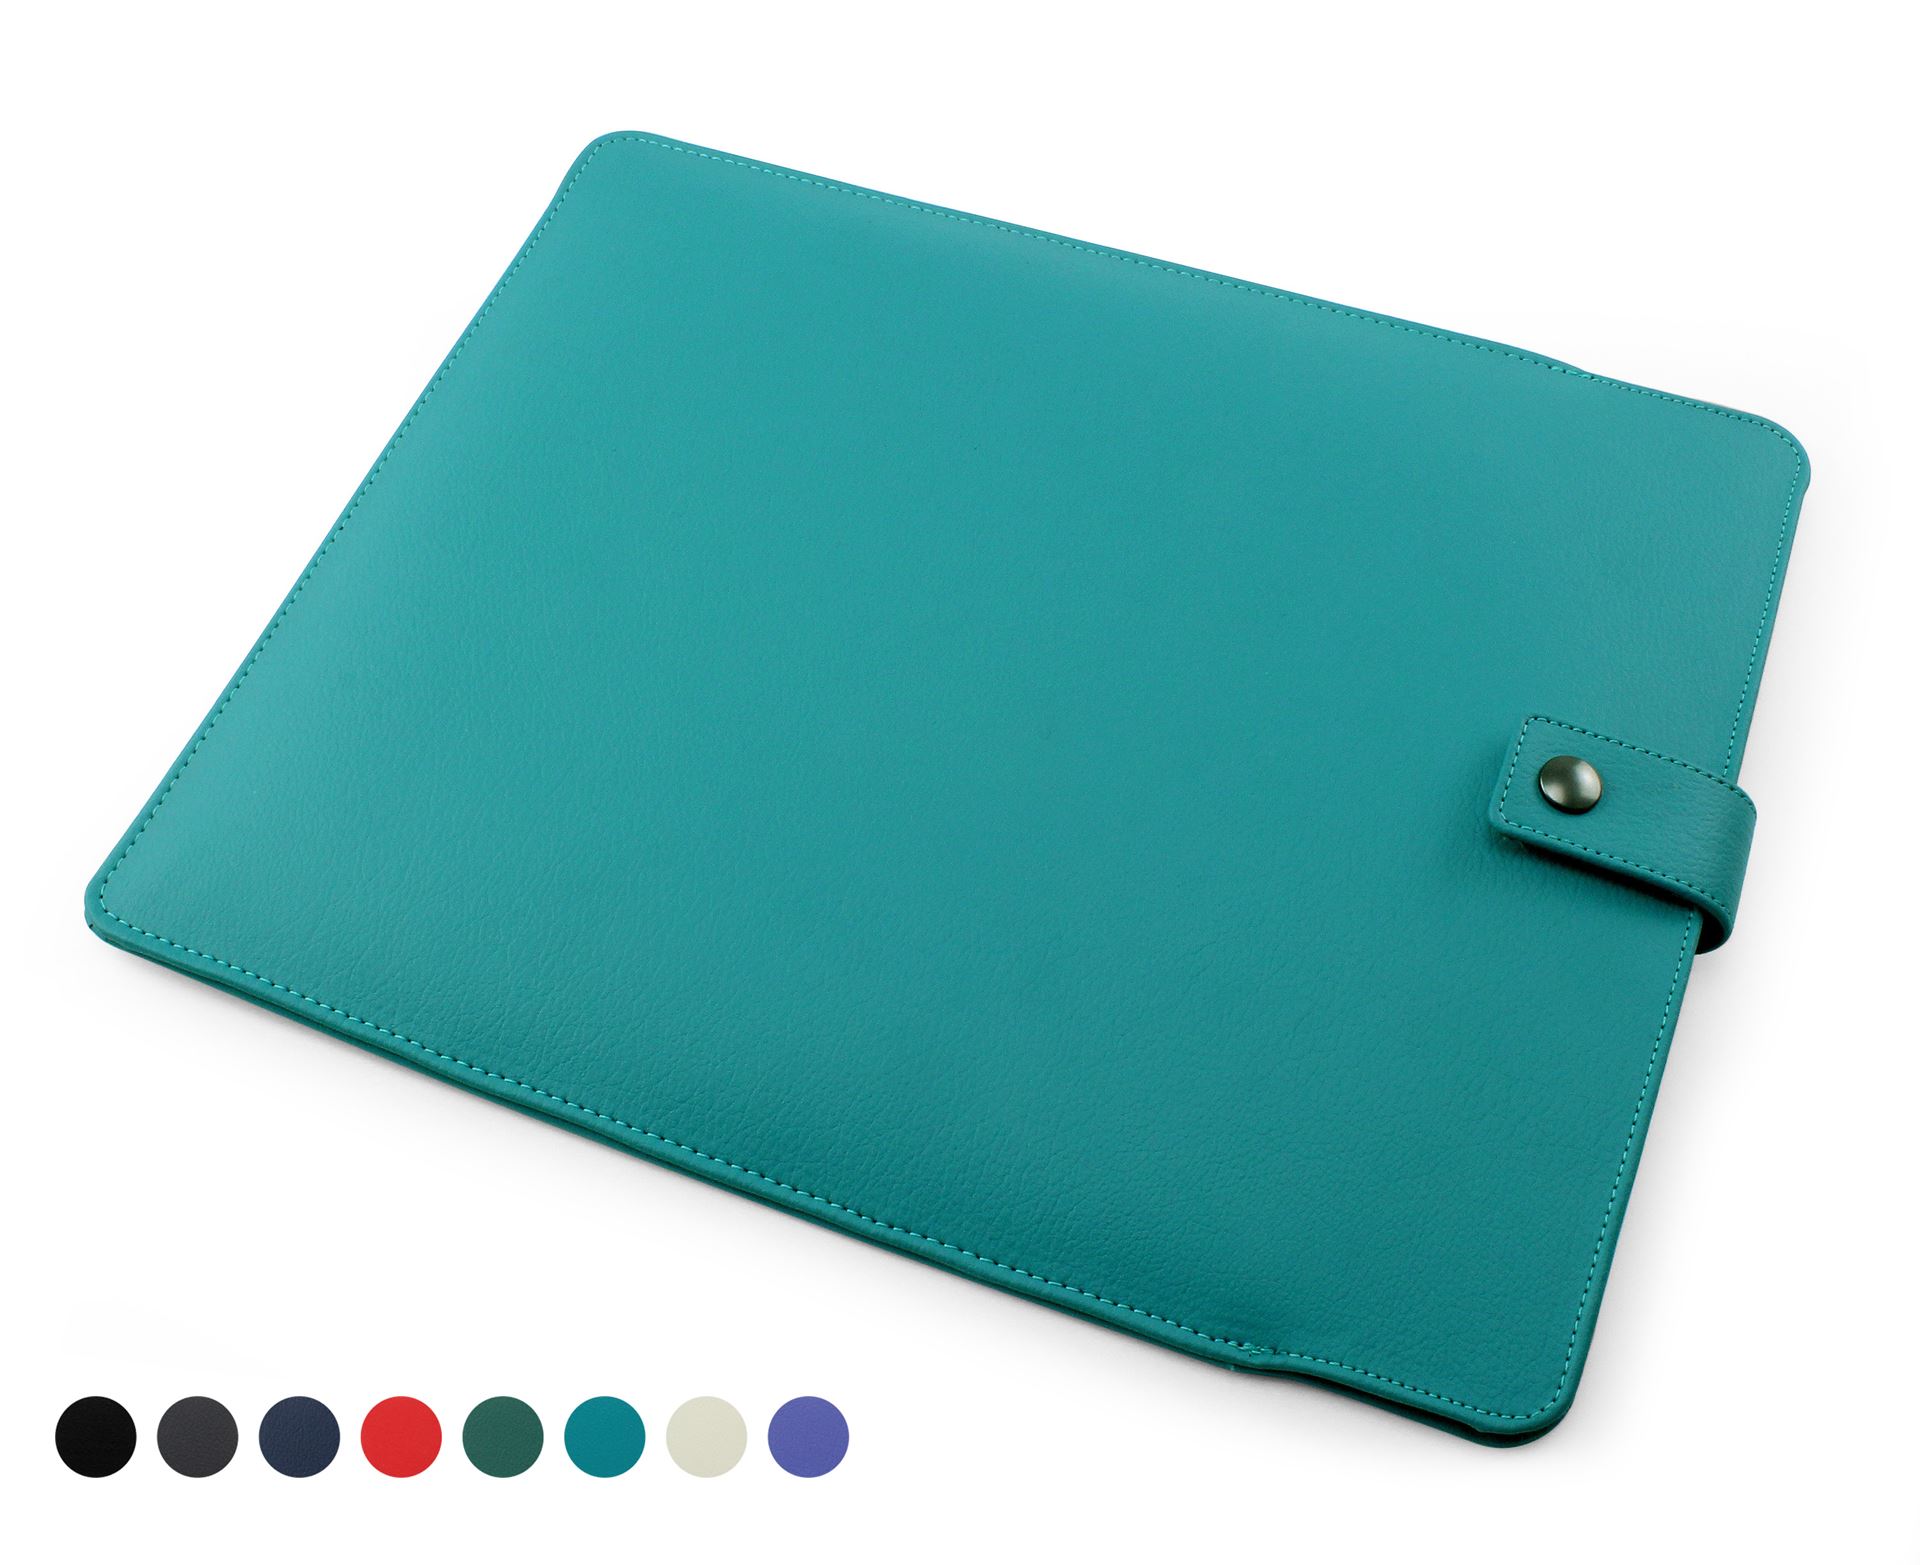 Recycled ELeather iPad Pro Tablet Sleeve, made in the UK in a choice of 8 colours.